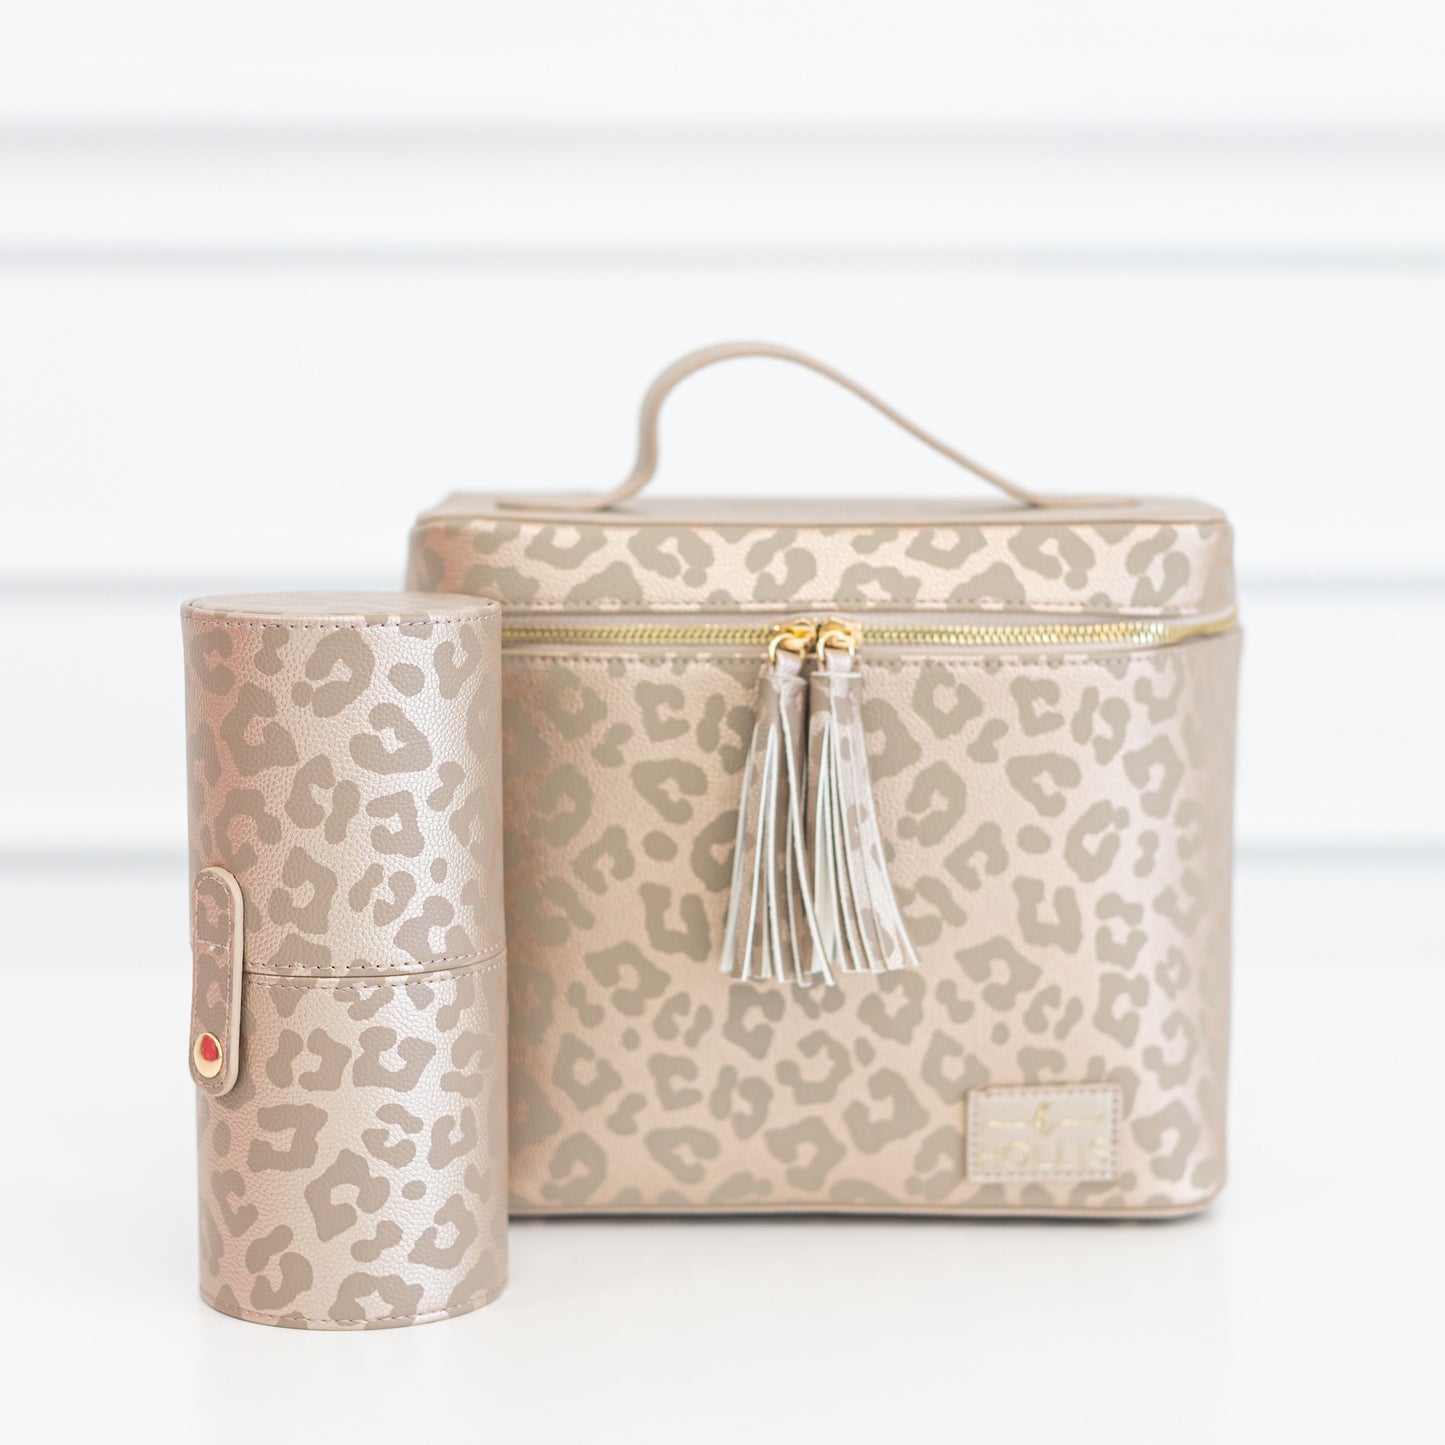 Hollis Leopard Lux Makeup Case – The Smith Jewelry and Living